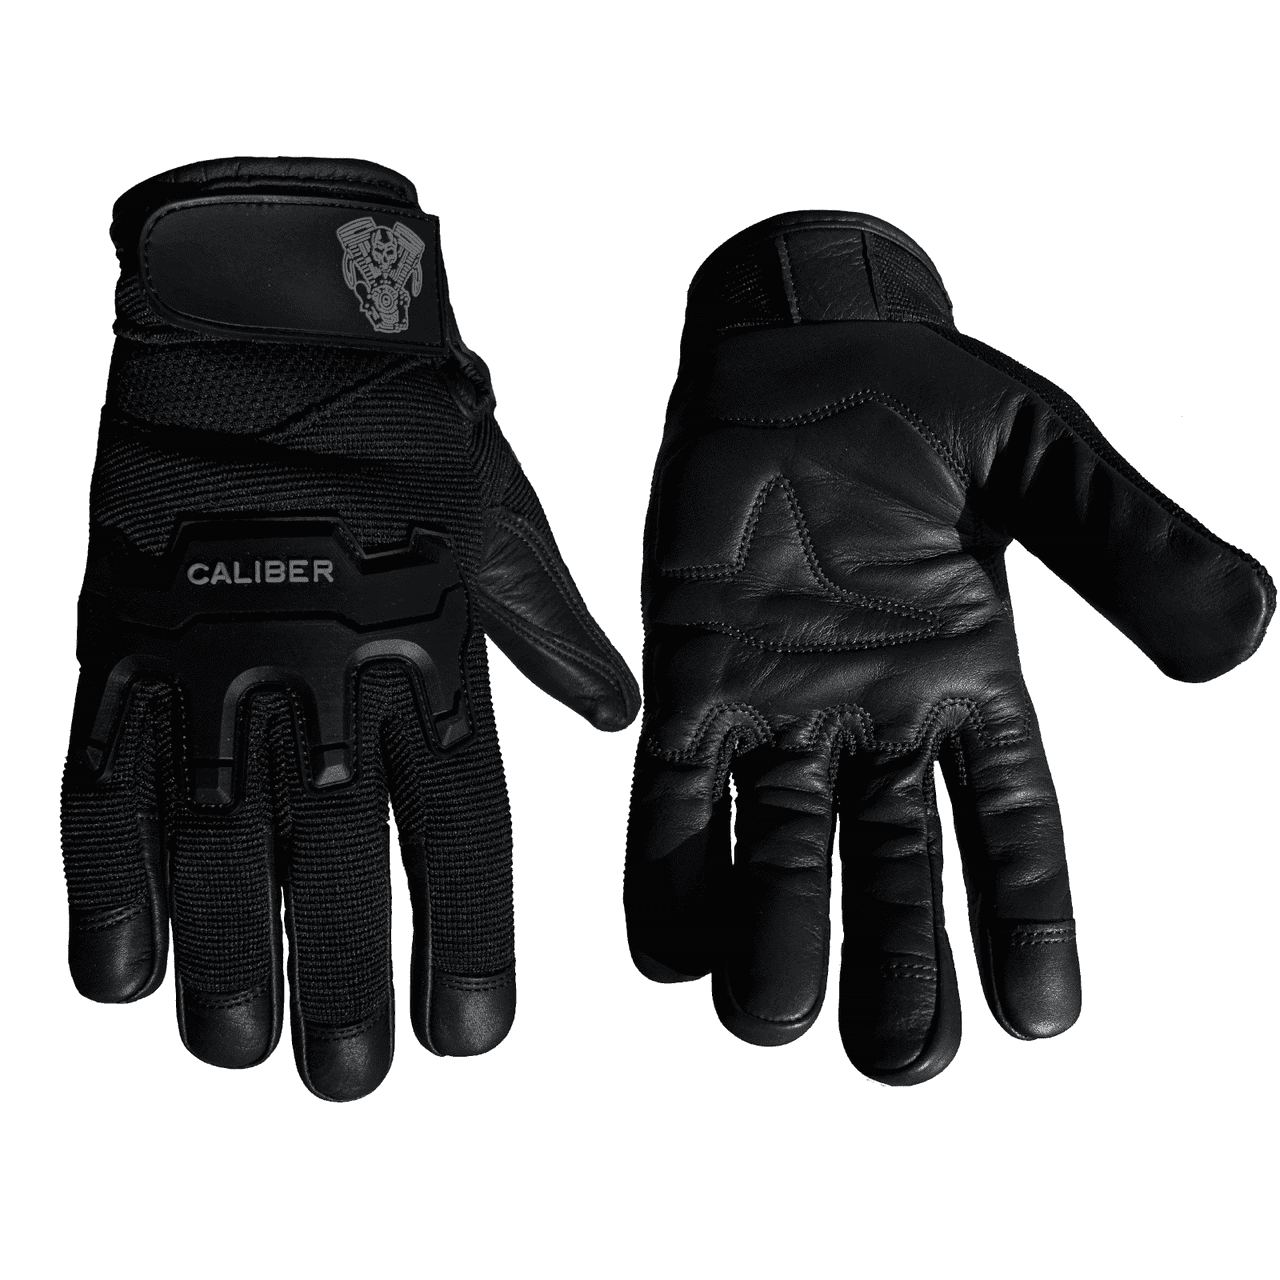 VL478-Caliber-Mens-Textile-Motorcycle-Gloves-with-Touch-Capability-front-back-view